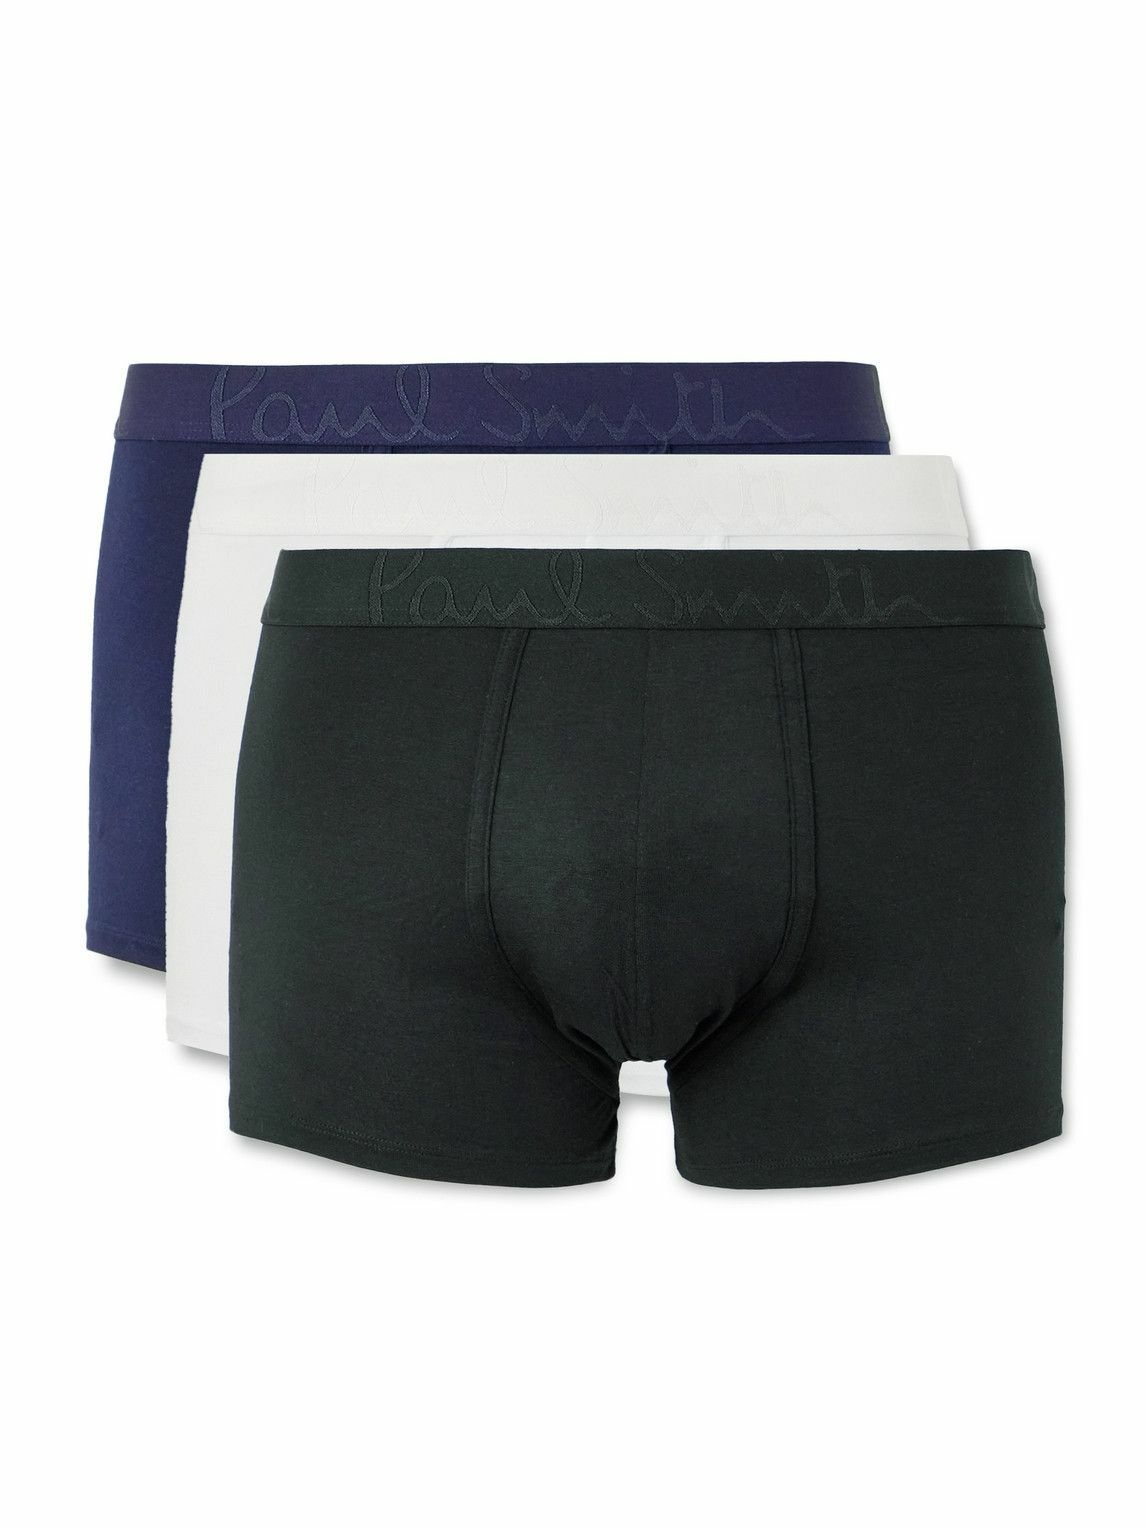 Paul Smith - Three-Pack Stretch Modal-Jersey Boxer Briefs - Multi